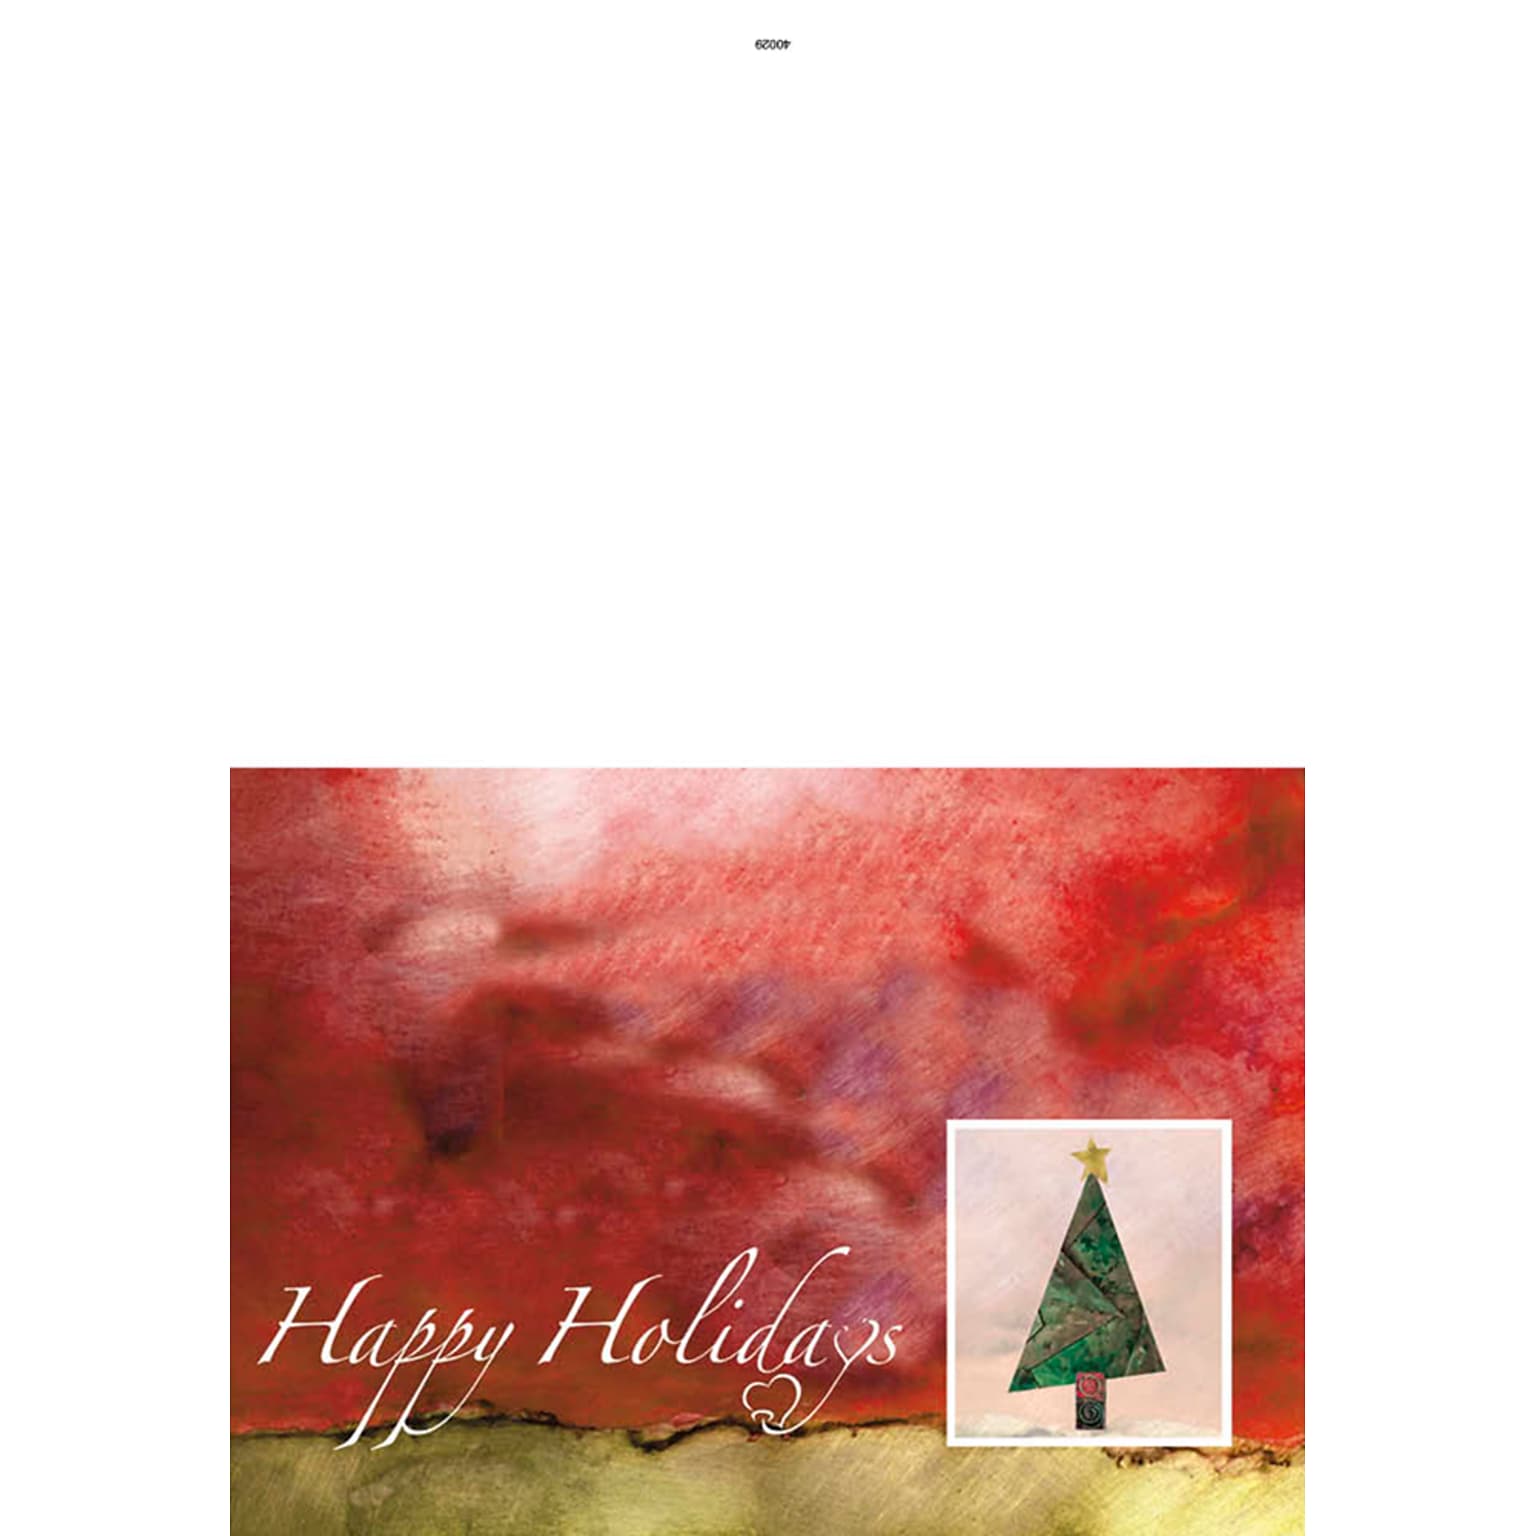 Happy Holidays cut out christmas tree - 7 x 10 scored for folding to 7 x 5, 25 cards w/A7 envelopes per set